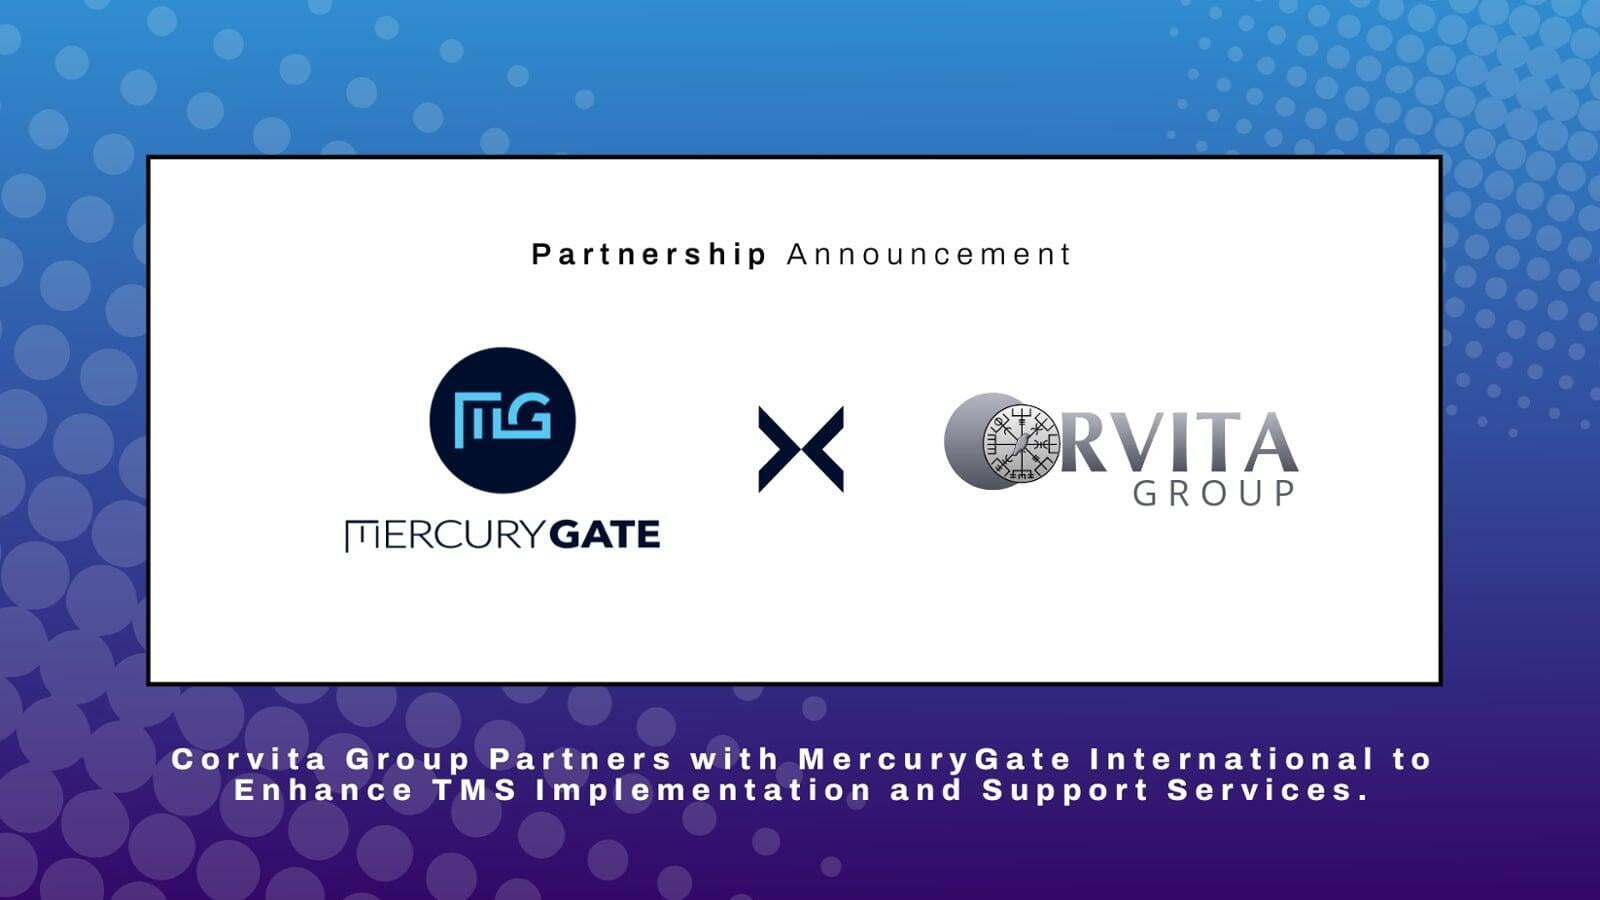 Corvita Group Partners with MercuryGate International to Enhance TMS Implementation and Support Services